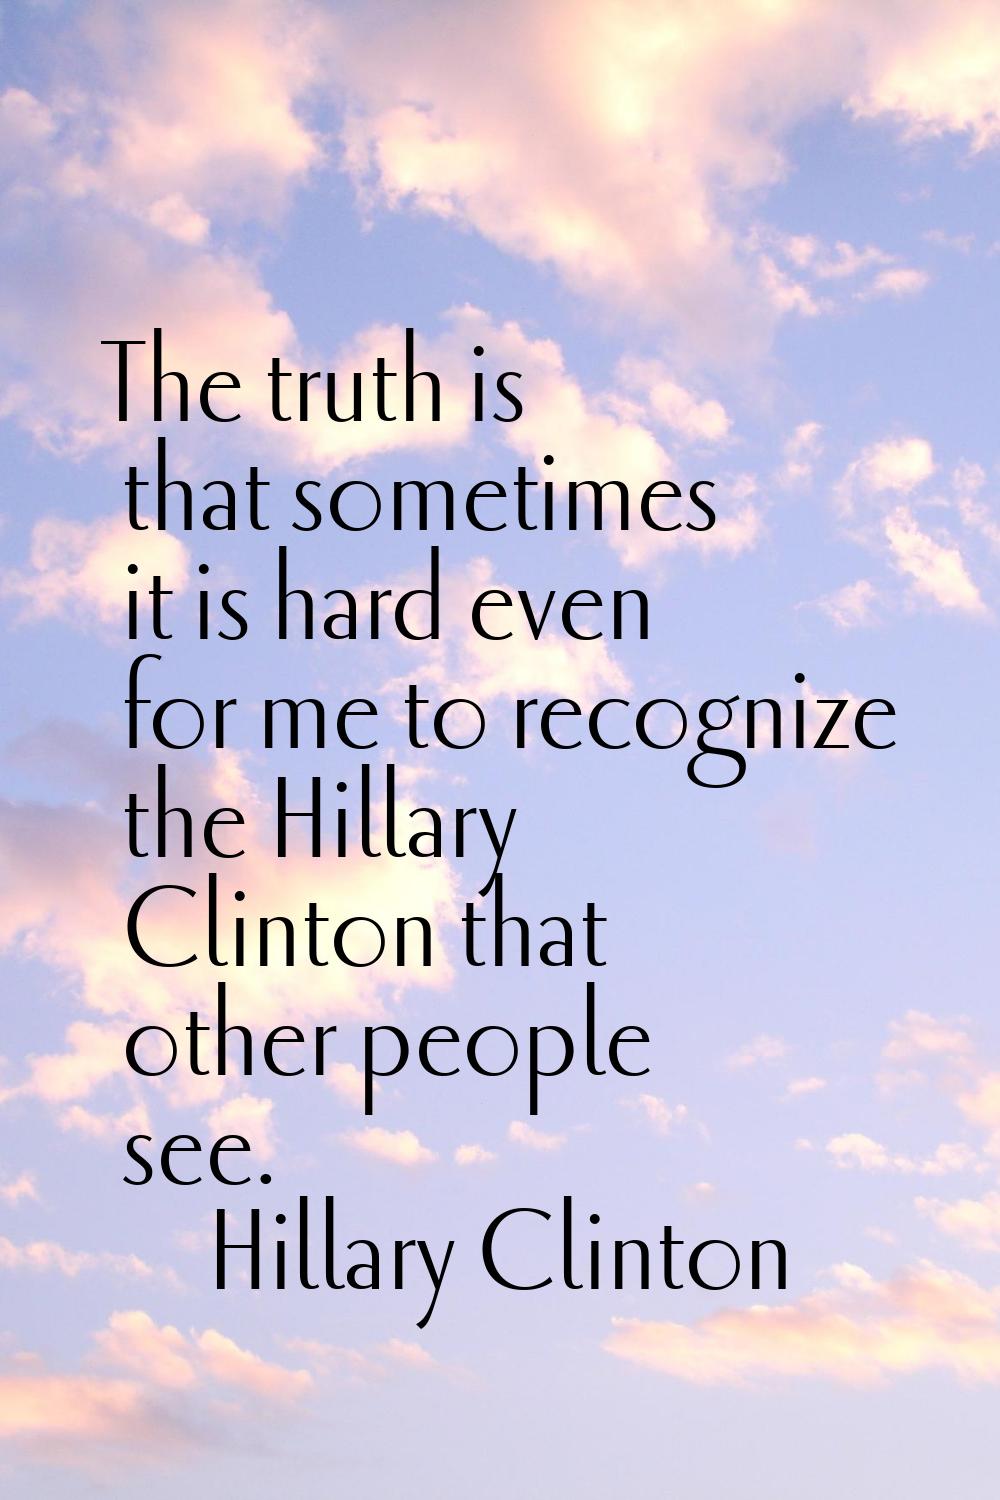 The truth is that sometimes it is hard even for me to recognize the Hillary Clinton that other peop